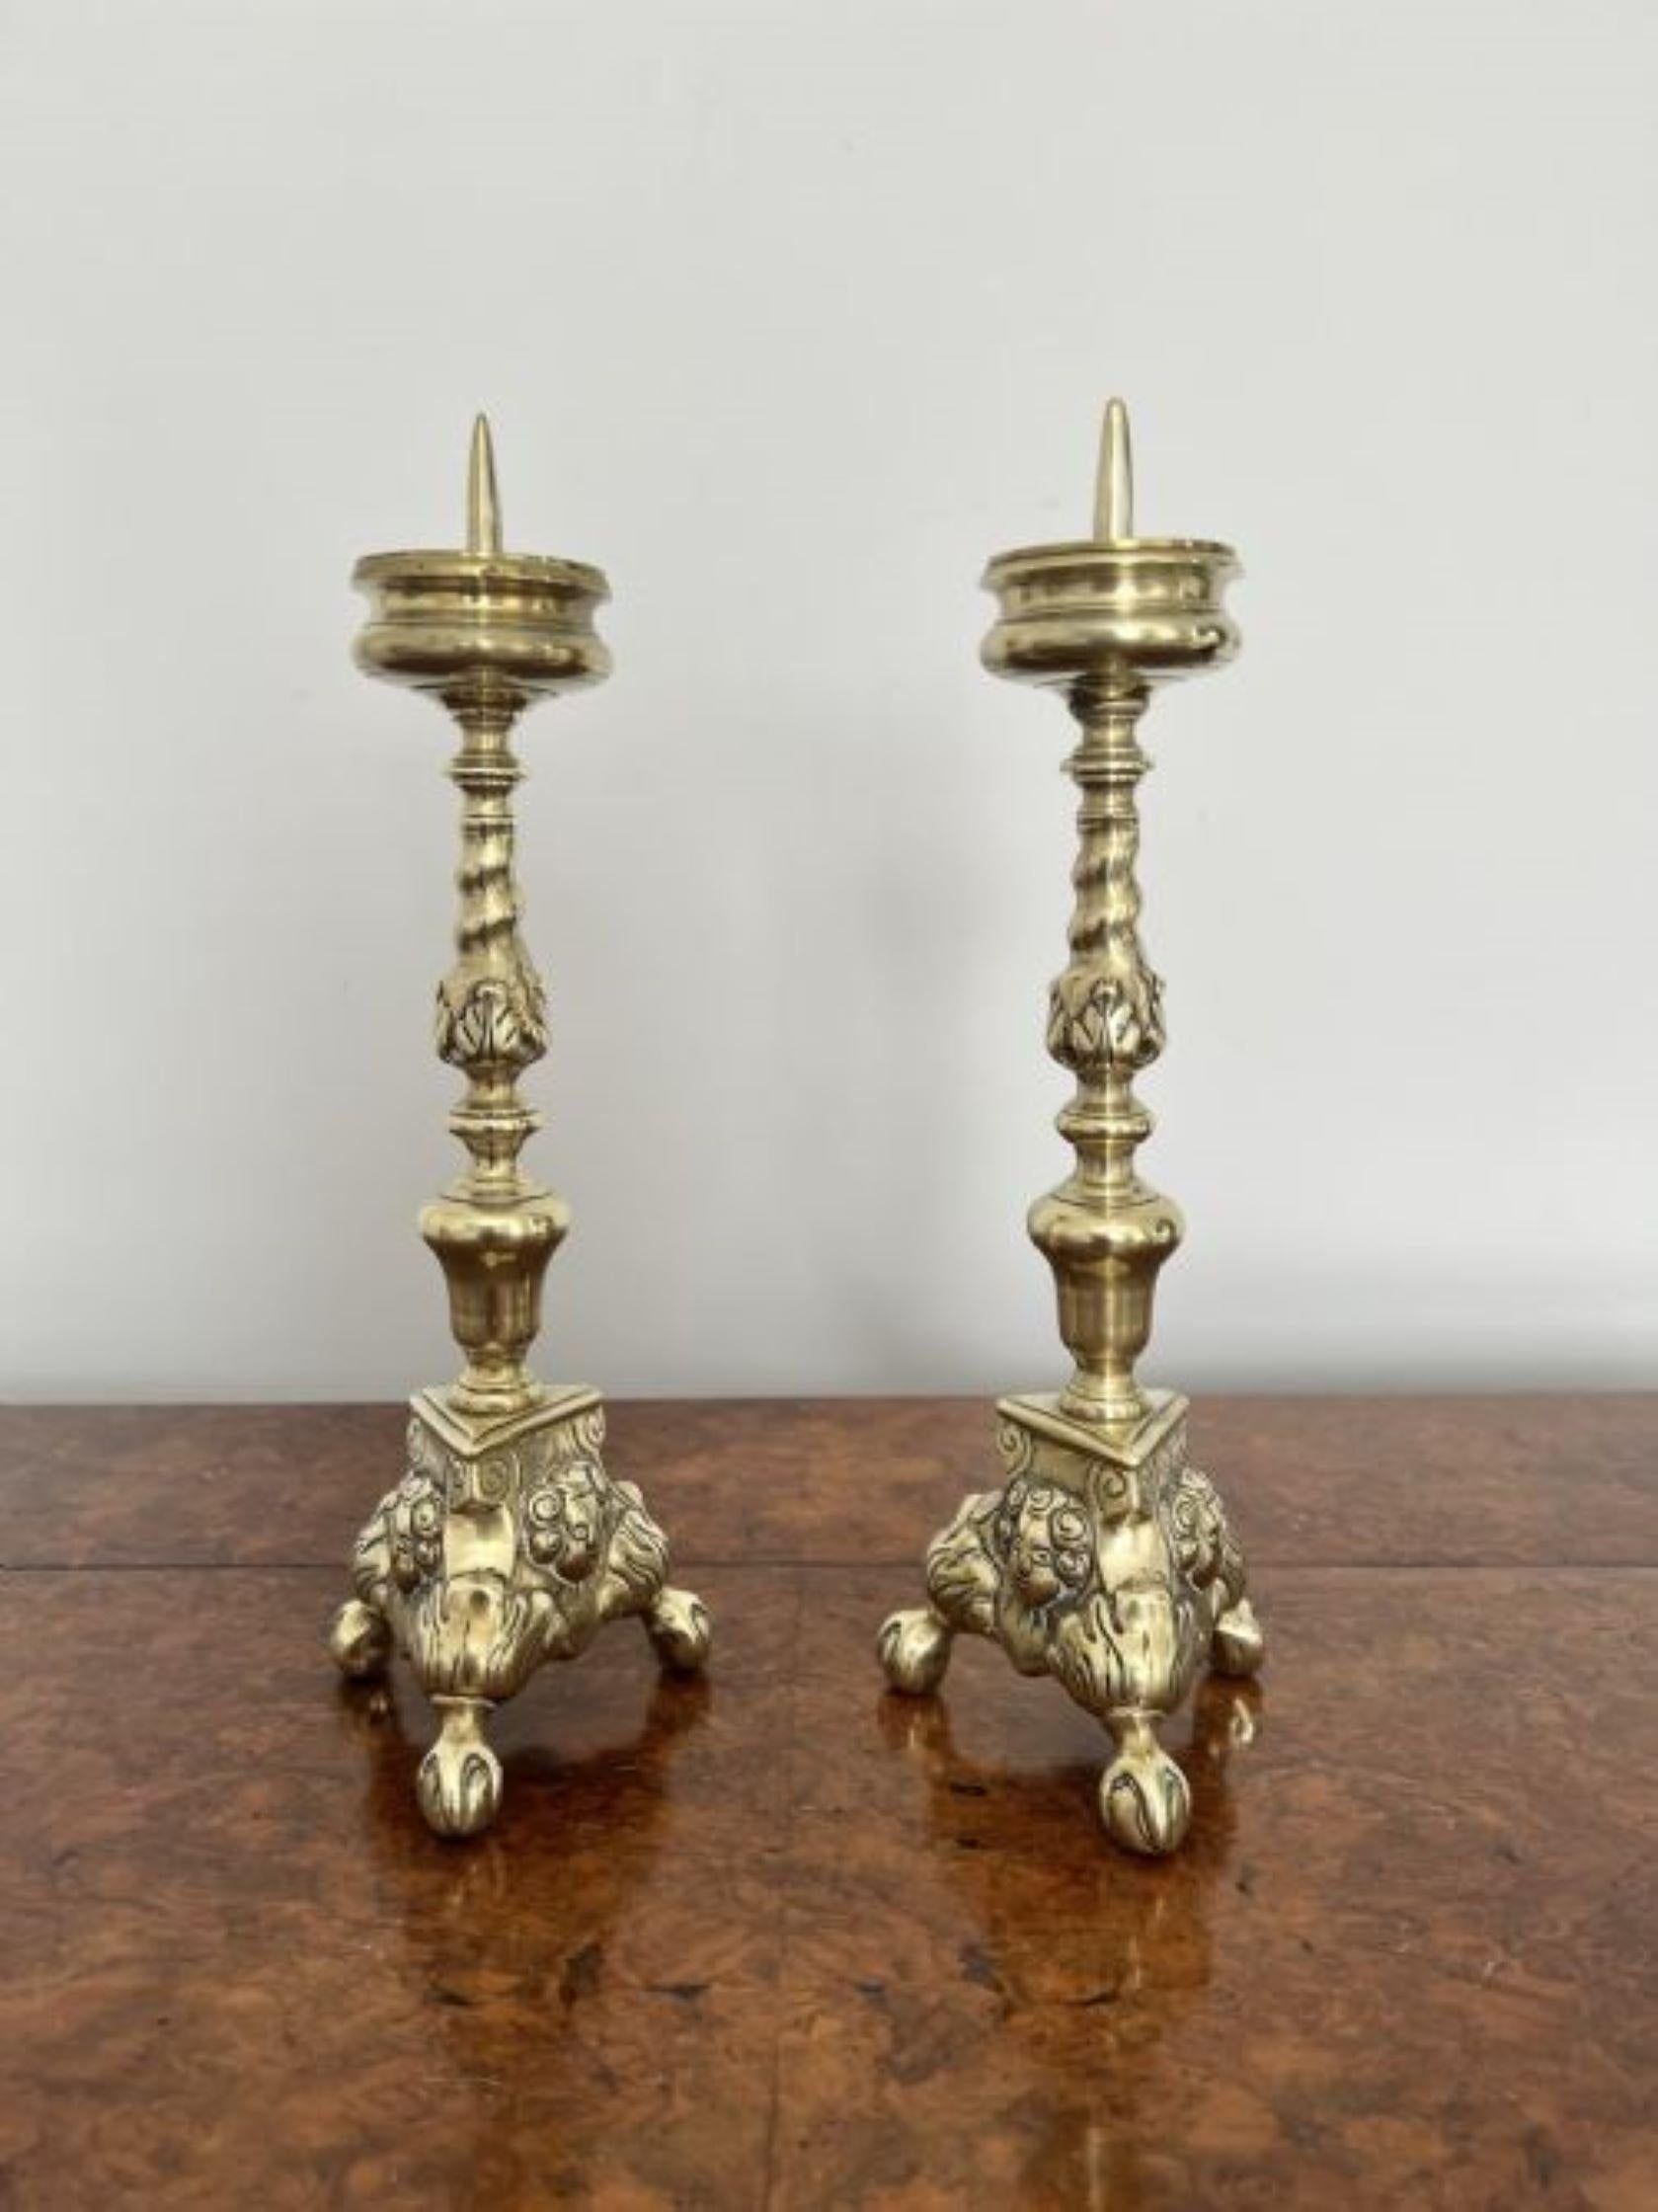 Quality pair of unusual antique Victorian ornate brass pricket candlestick having a quality unusual pair of ornate brass pricket candlesticks having a turned twisted stem above a tripod base standing on ball and claw feet